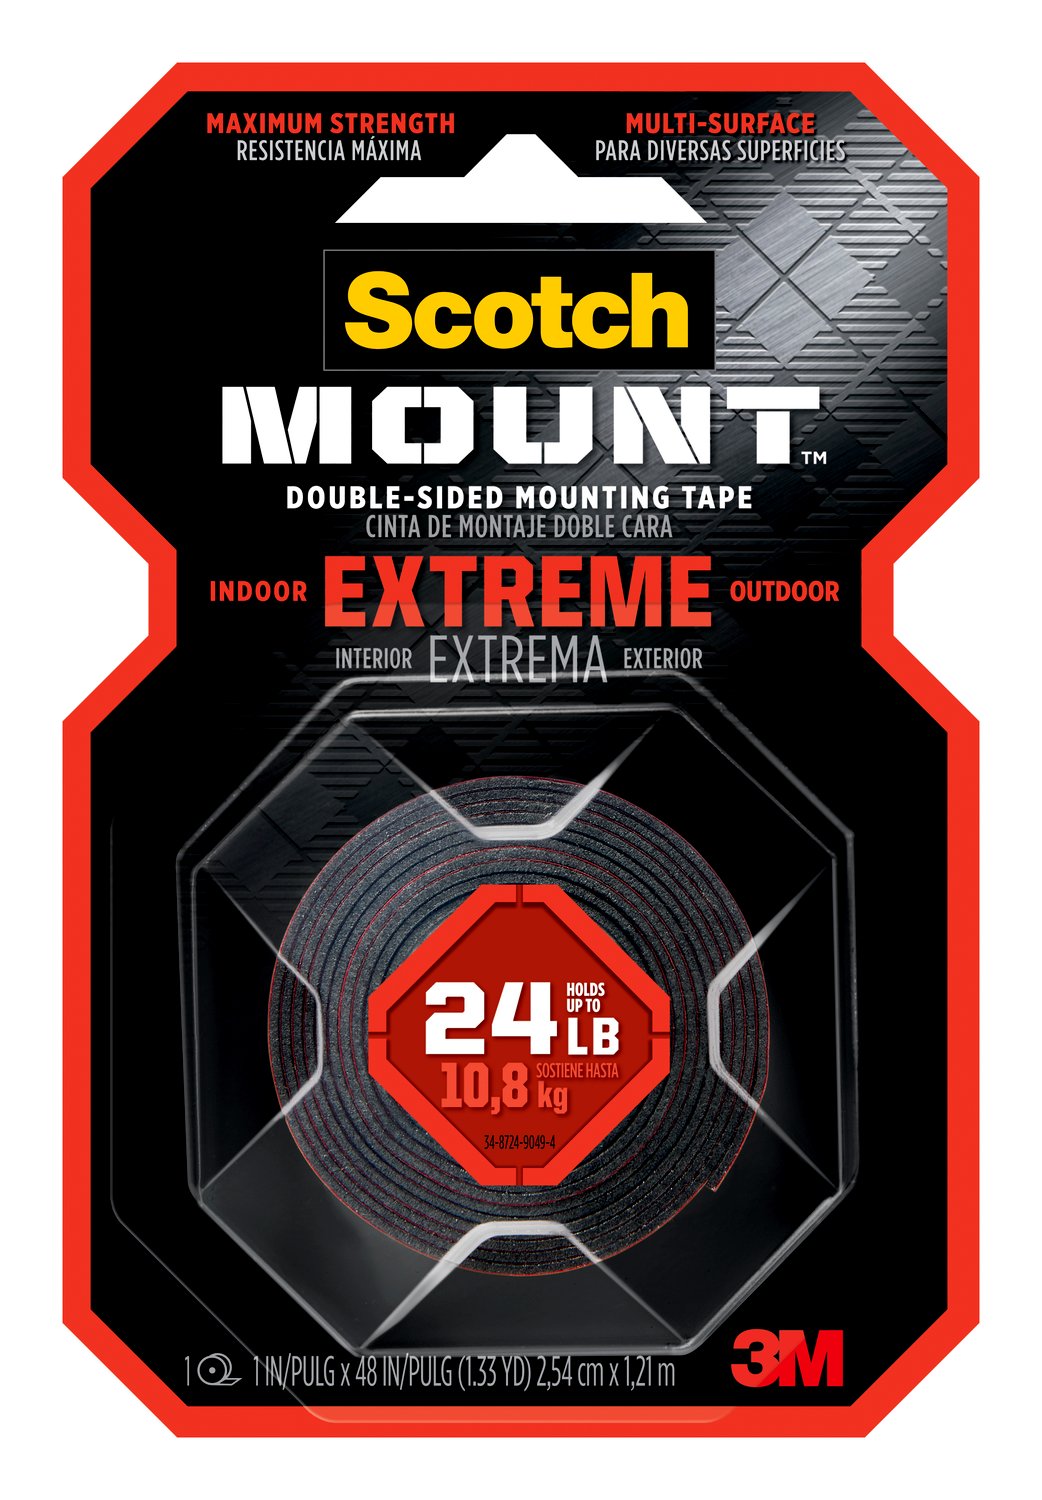 7100216178 - Scotch-Mount Extreme Double-Sided Mounting Tape 414H-48, 1 in x 48 in (2,54 cm x 1,21 m)